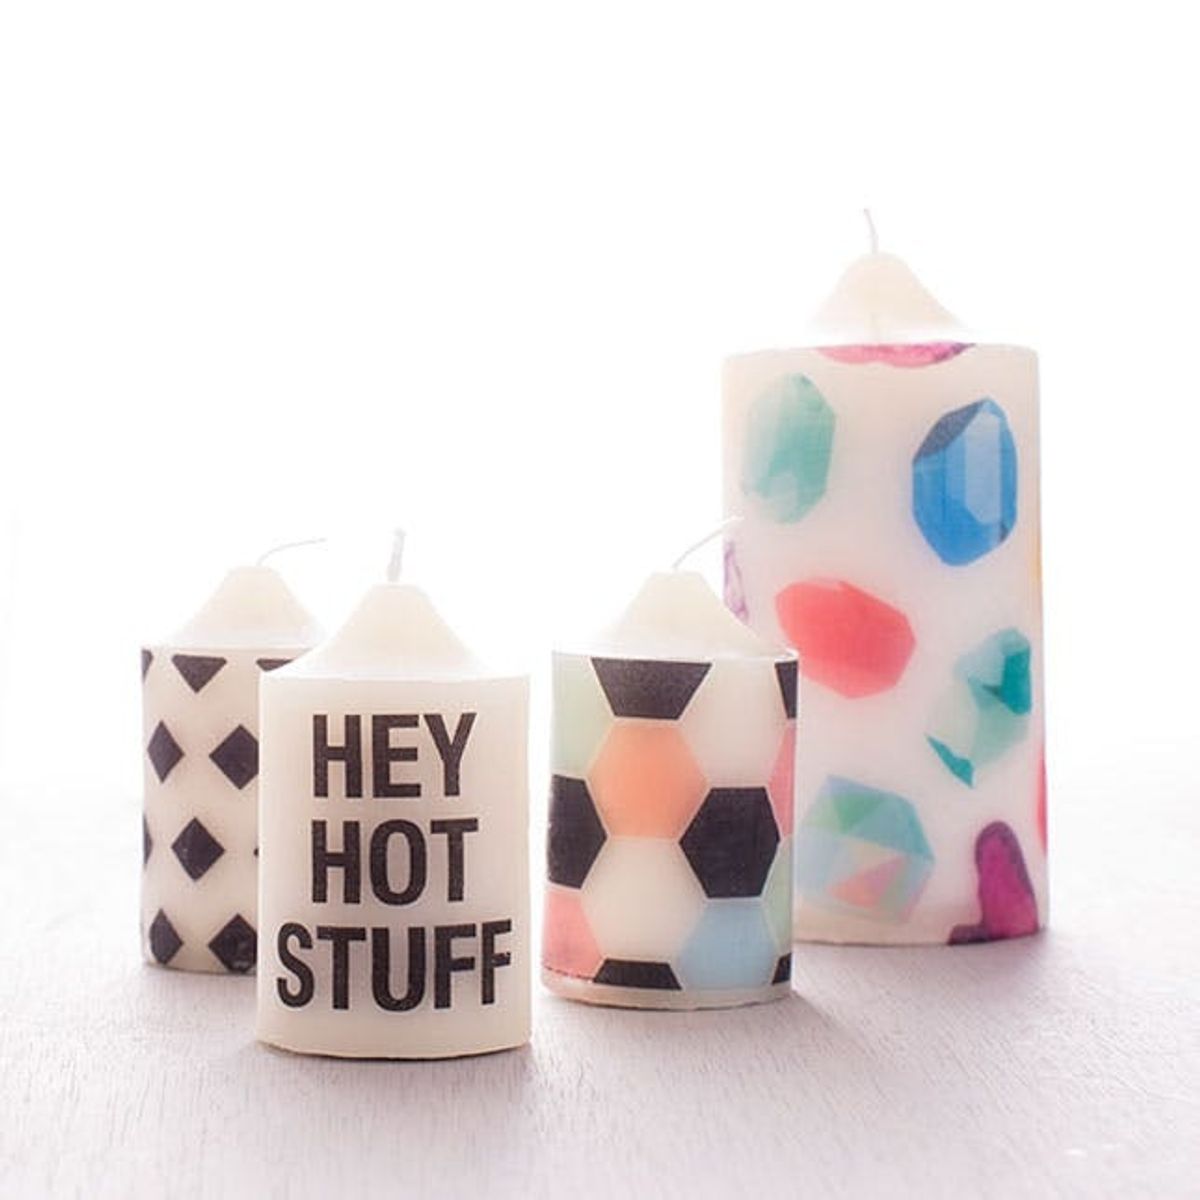 How to Make Patterned Candles in Under 10 Minutes